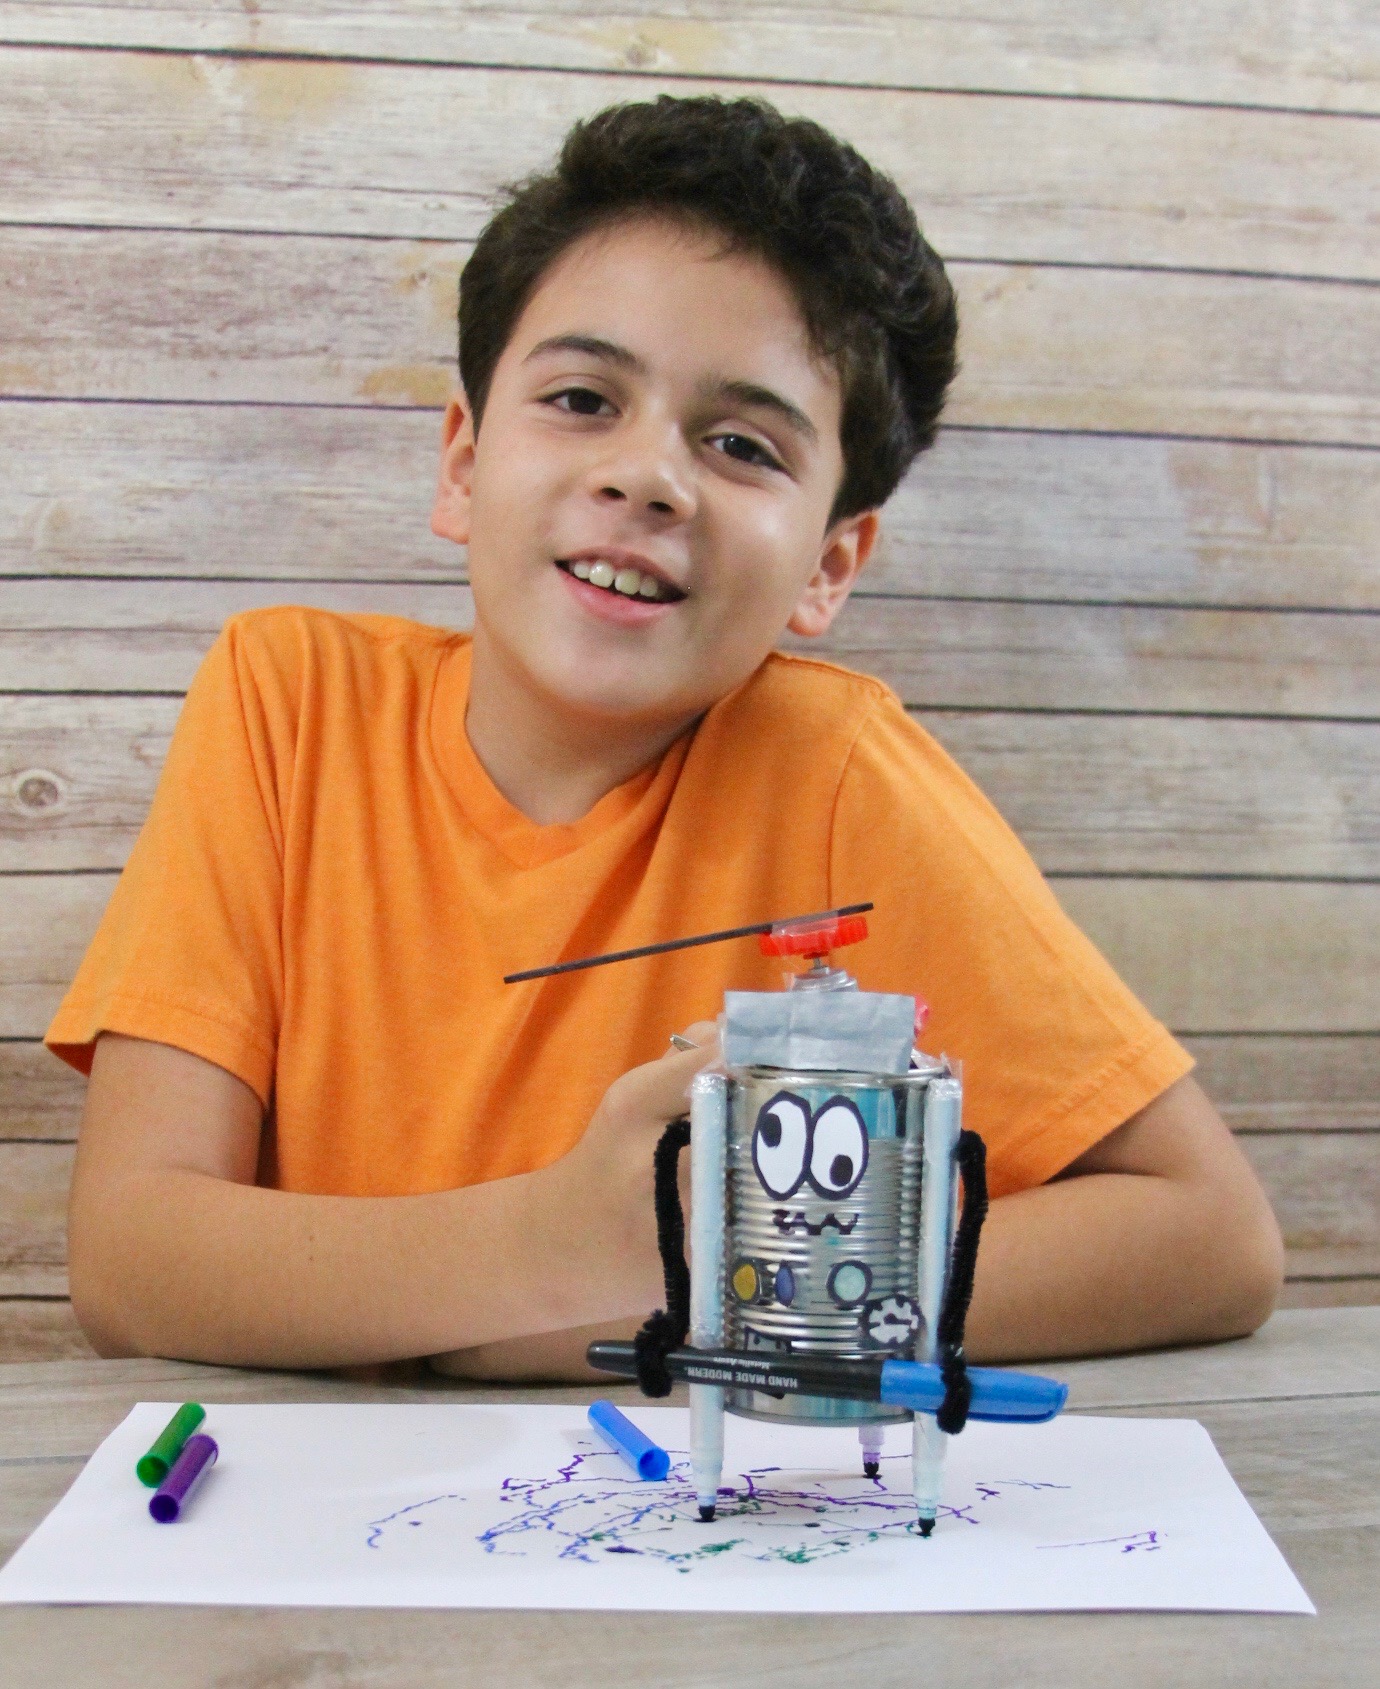 DIY Wiggle Robot and other Fun Hands-On STEM Projects for Kids